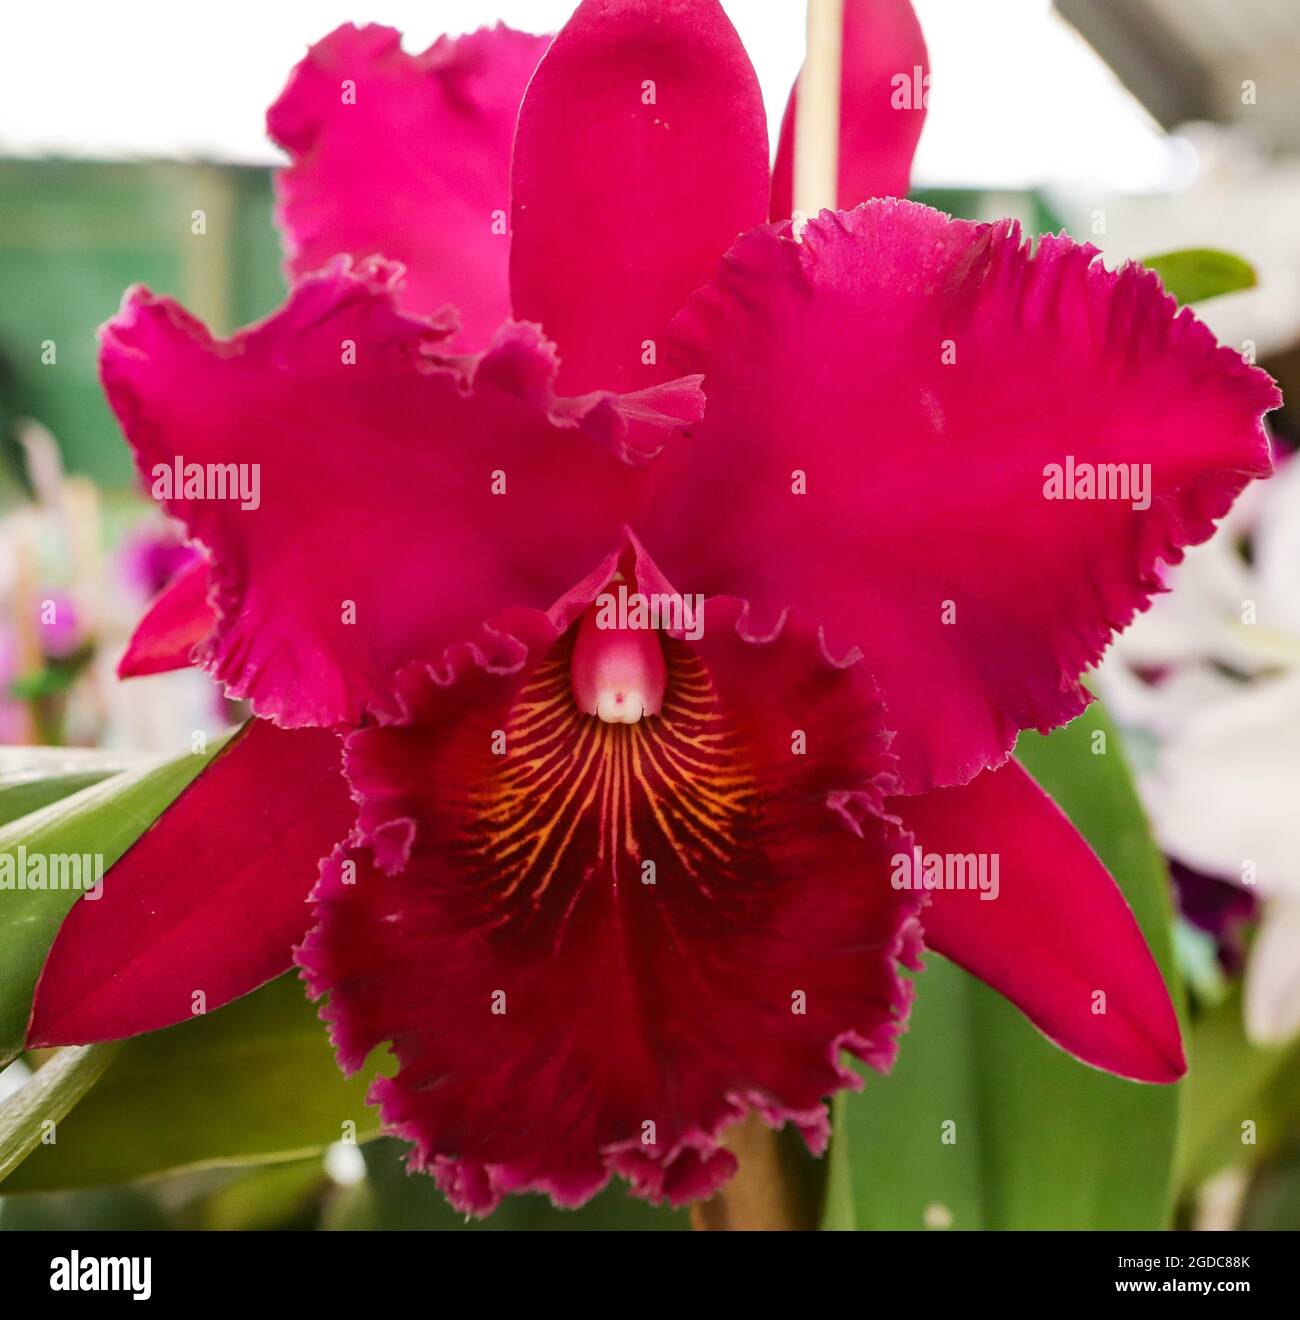 Blc Chia Lin orchid flower with center focus and rest of image blurred Stock Photo